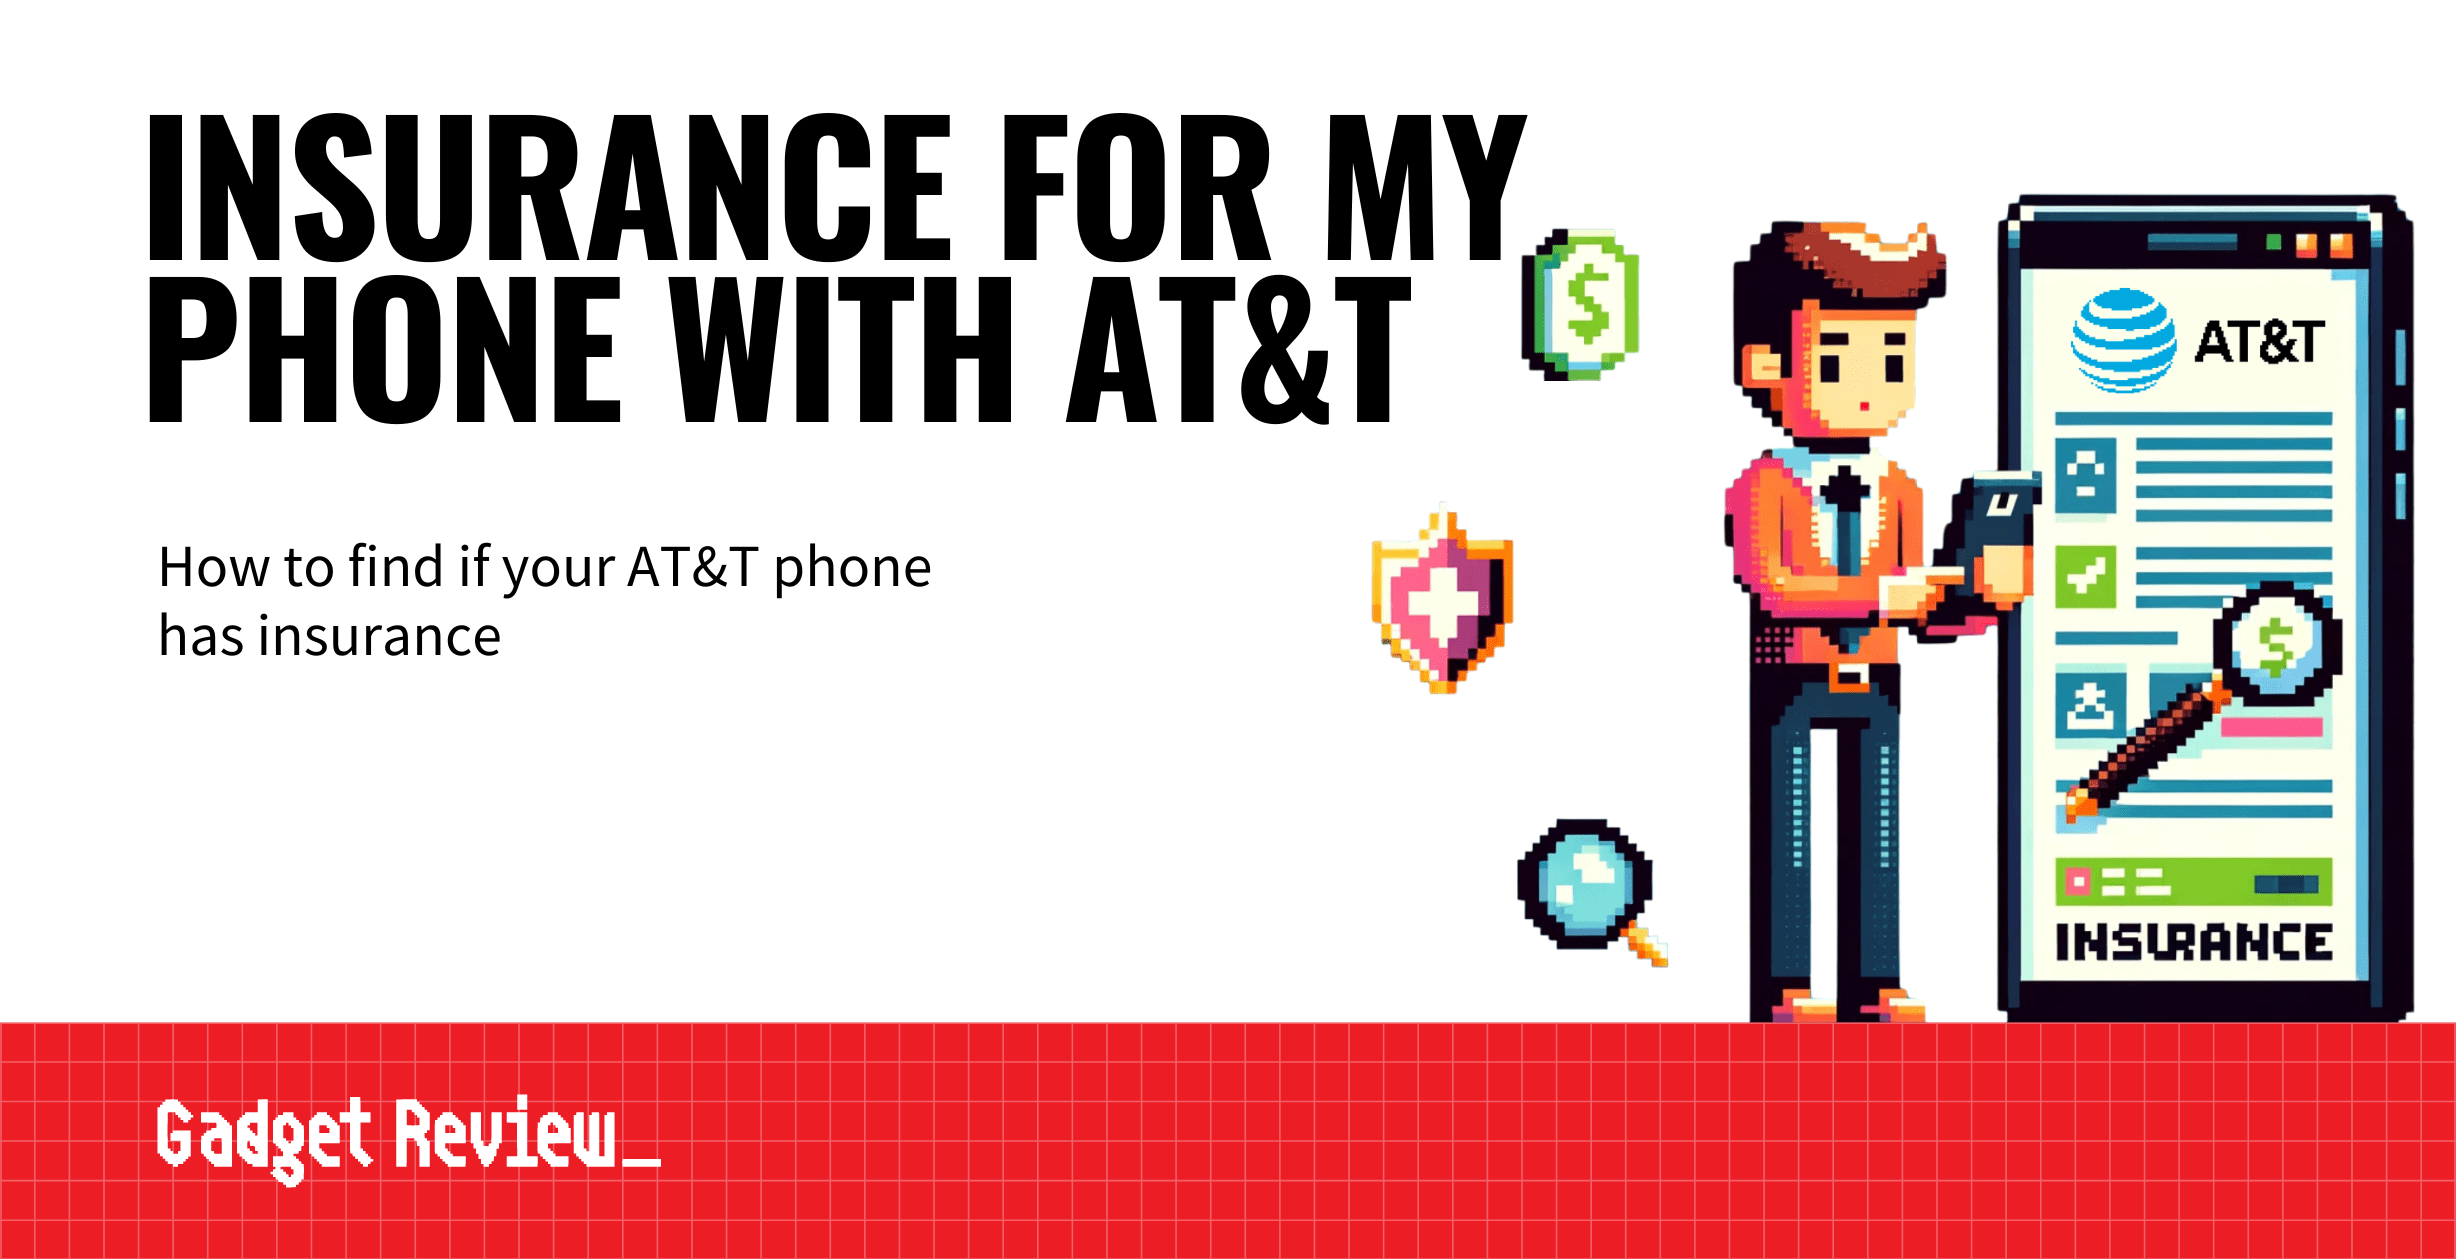 How Do I Know if I Have Insurance On My Phone With AT&T?